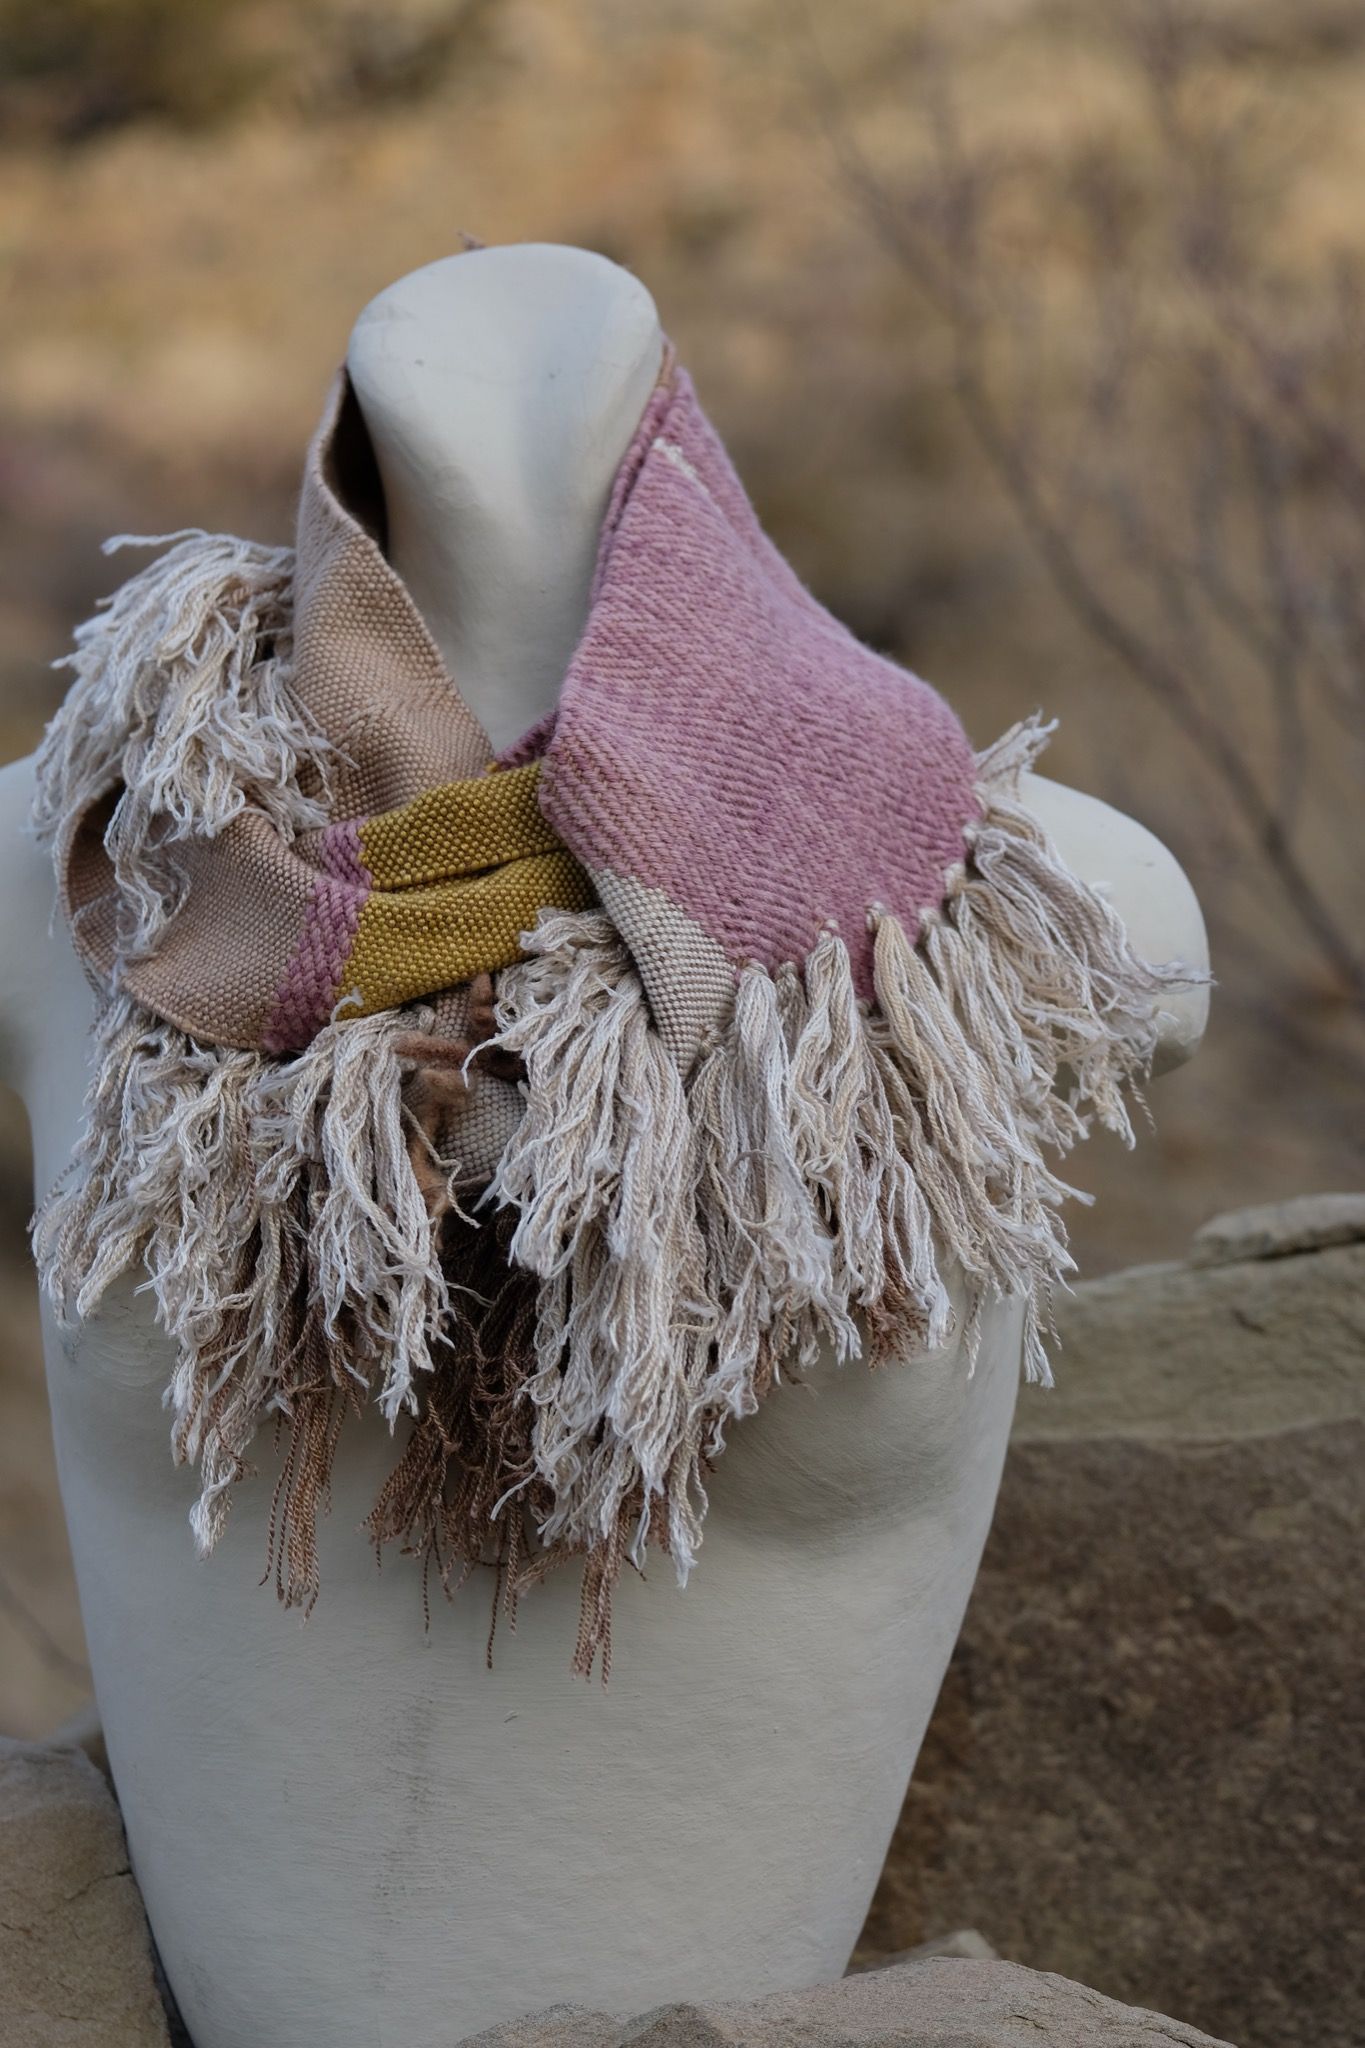 naturally dyed brown, tan white, mauve and gold infinity scarf on a white mannequin bust in the desert